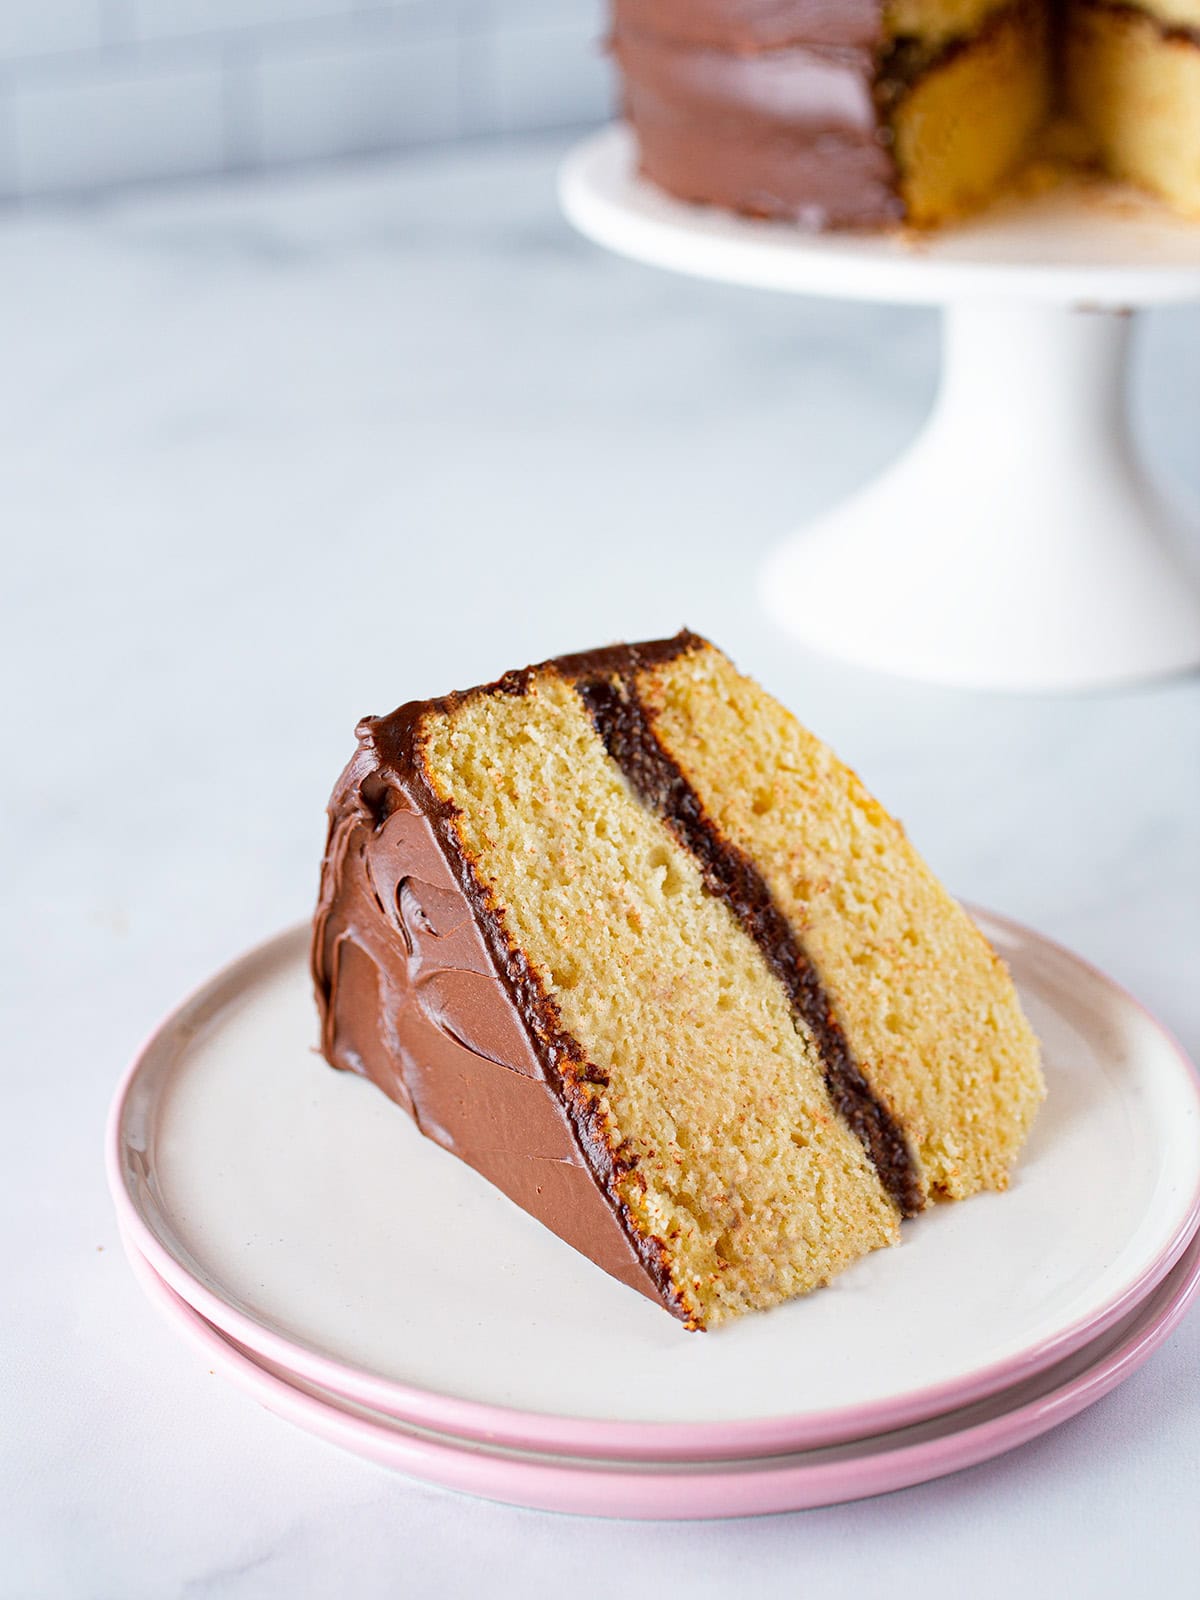 A slice of gluten-free yellow cake with chocolate frosting.